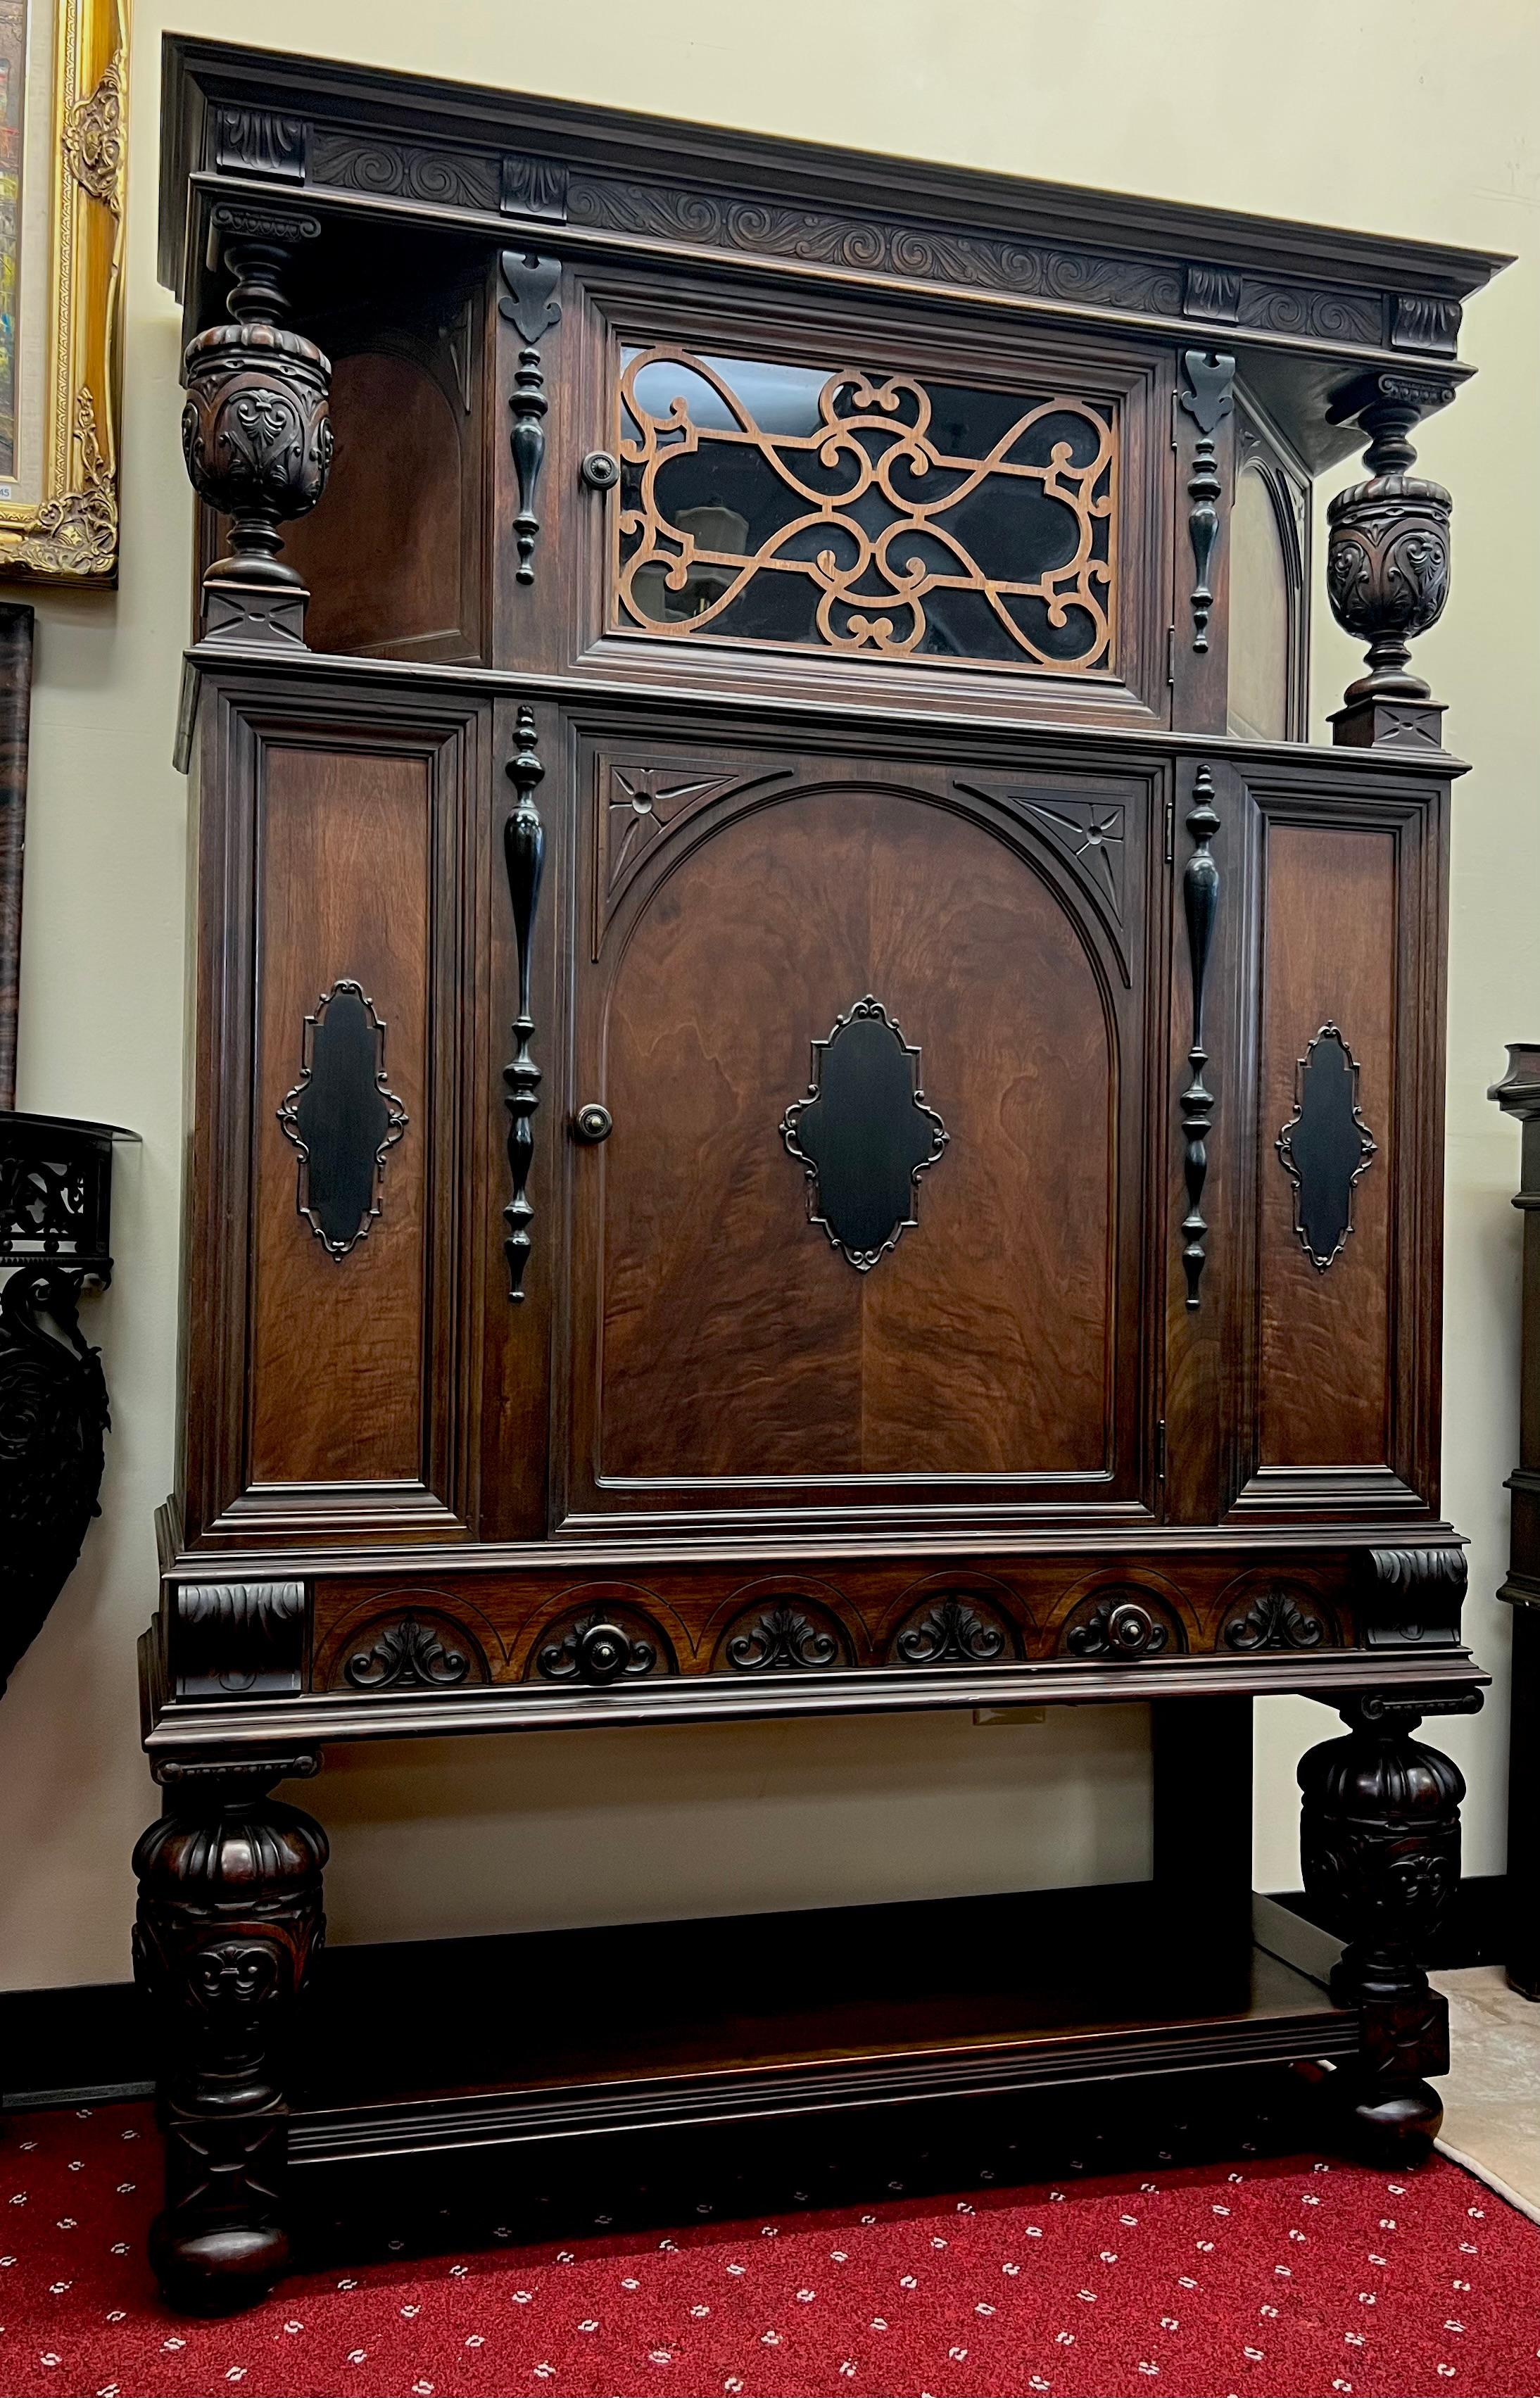 A Jacobean-style Highboy crafted by the renowned Rockford Furniture Company. Founded in 1876 by Swedish settlers, the company has a rich heritage of fine craftsmanship and timeless design.

This stunning highboy showcases the impeccable attention to